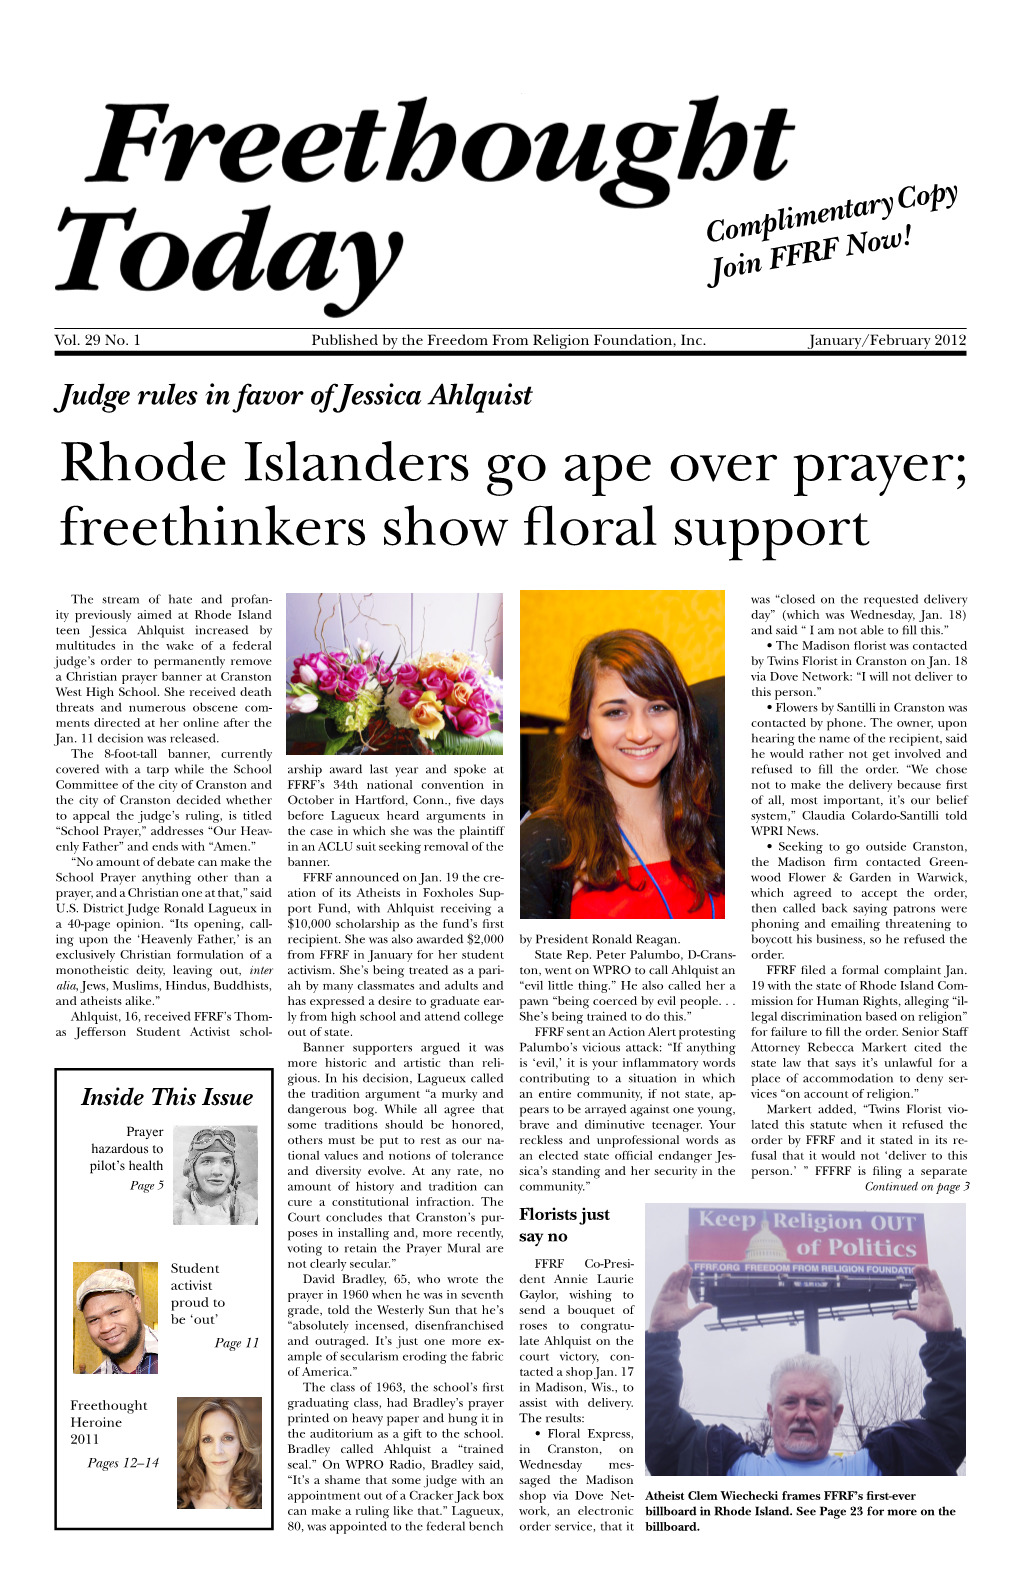 Rhode Islanders Go Ape Over Prayer; Freethinkers Show Floral Support